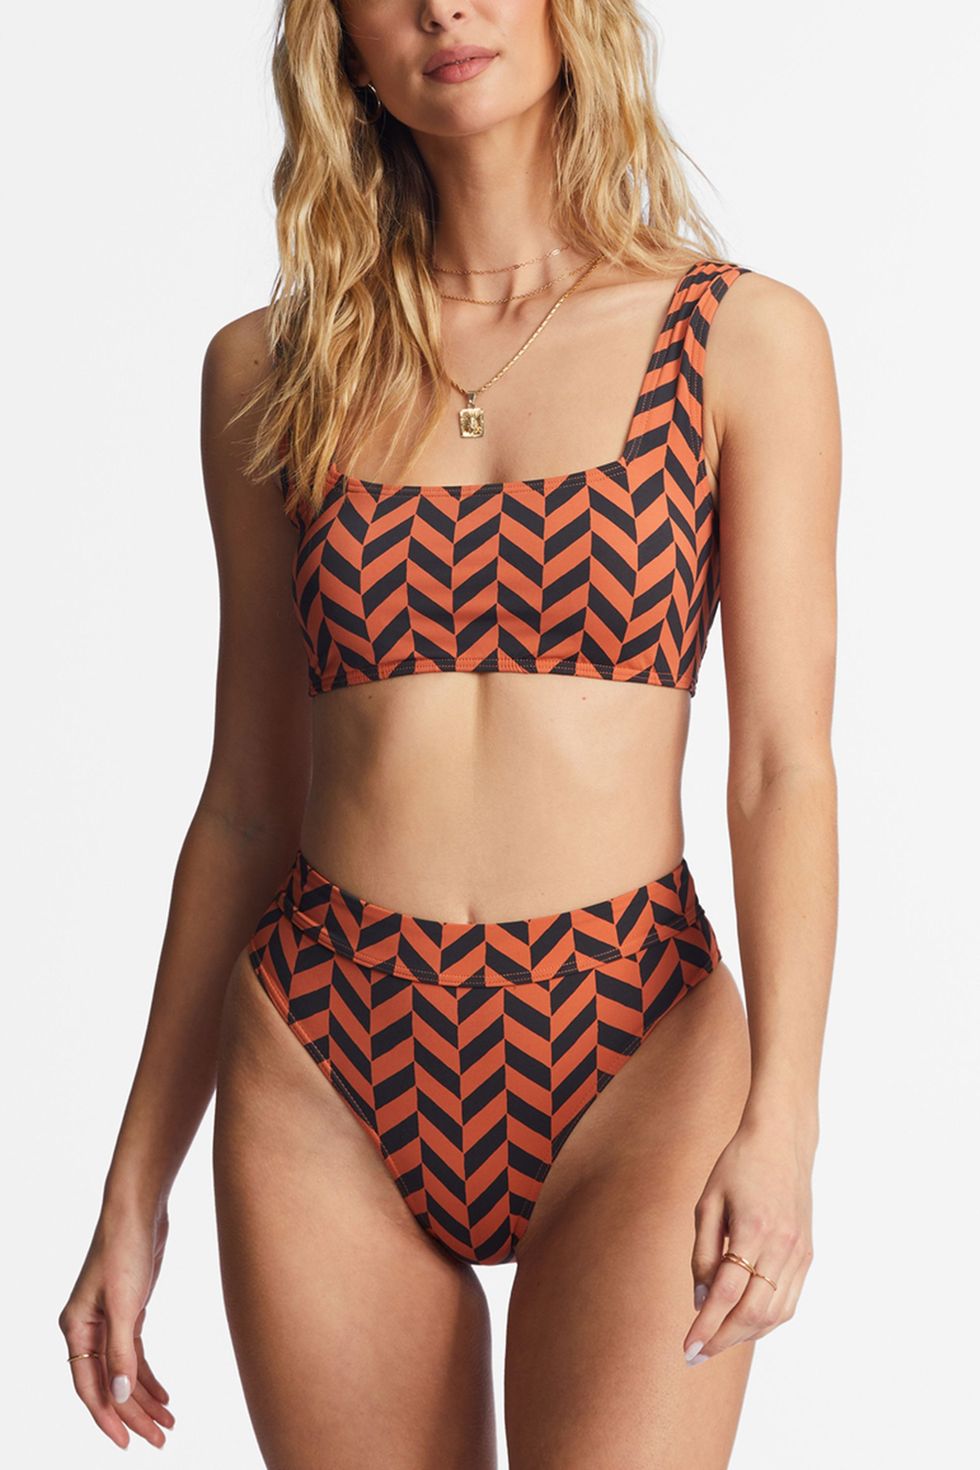 10 High-Waisted Bikinis That Are Fashionable and Flattering - Swimsuit